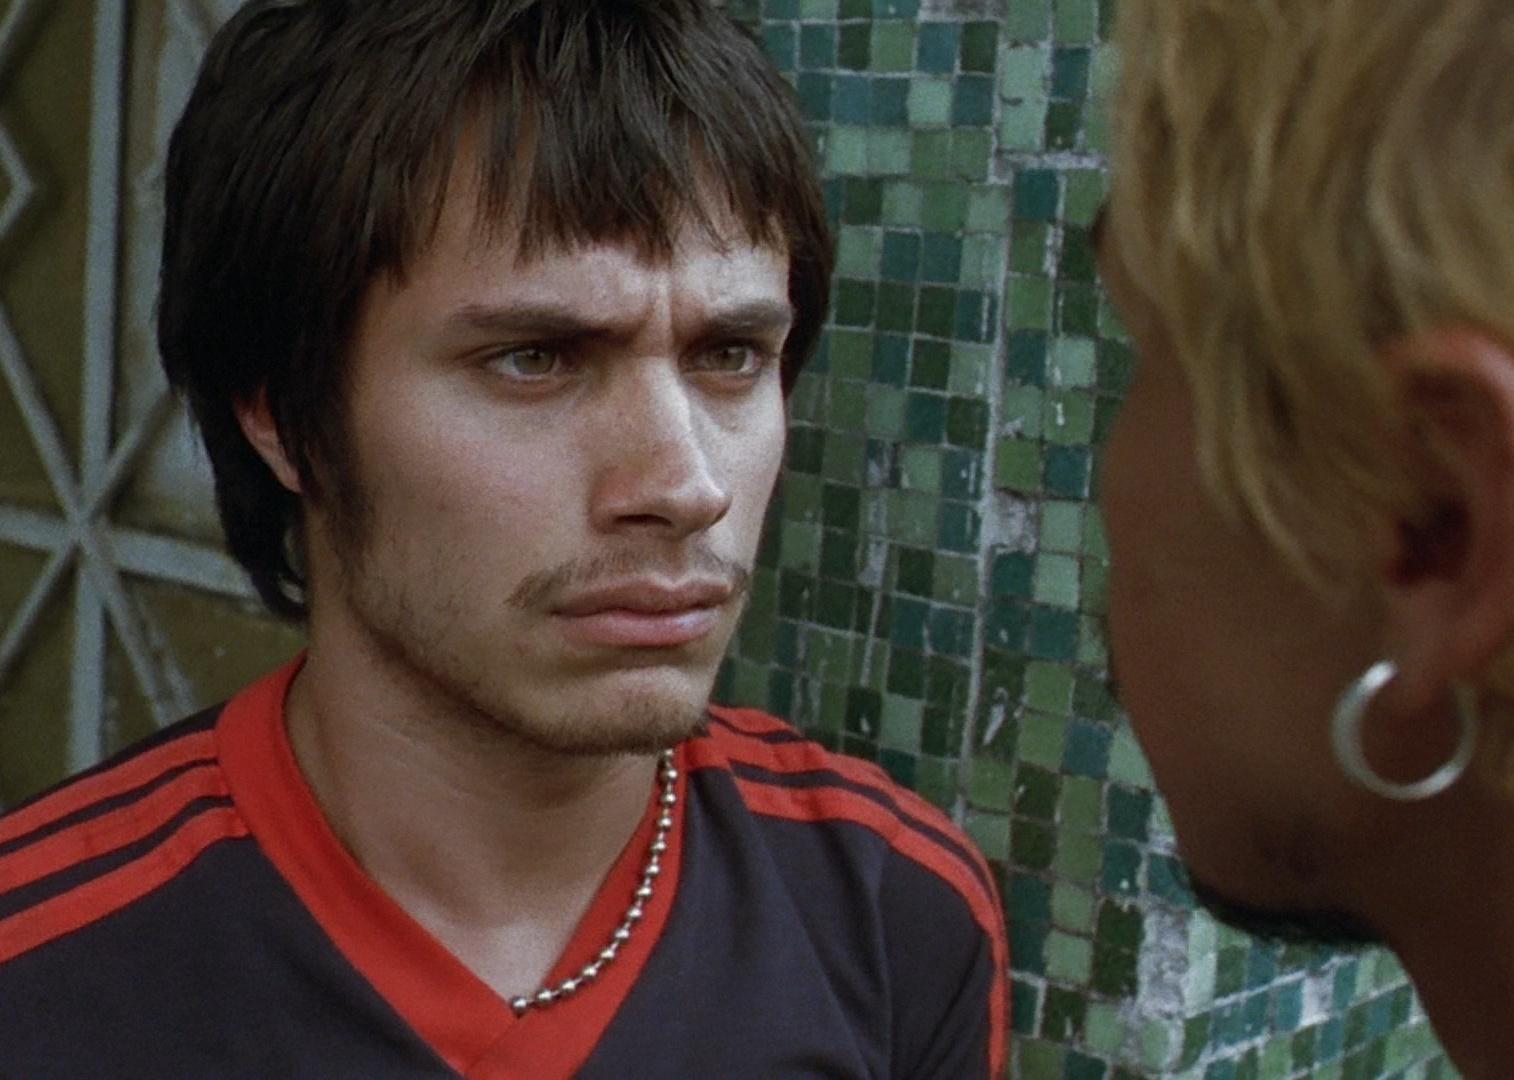 Gael García Bernal in a black and red adidas shirt staring seriously at a man with blonde hair and an earring who is in his face.